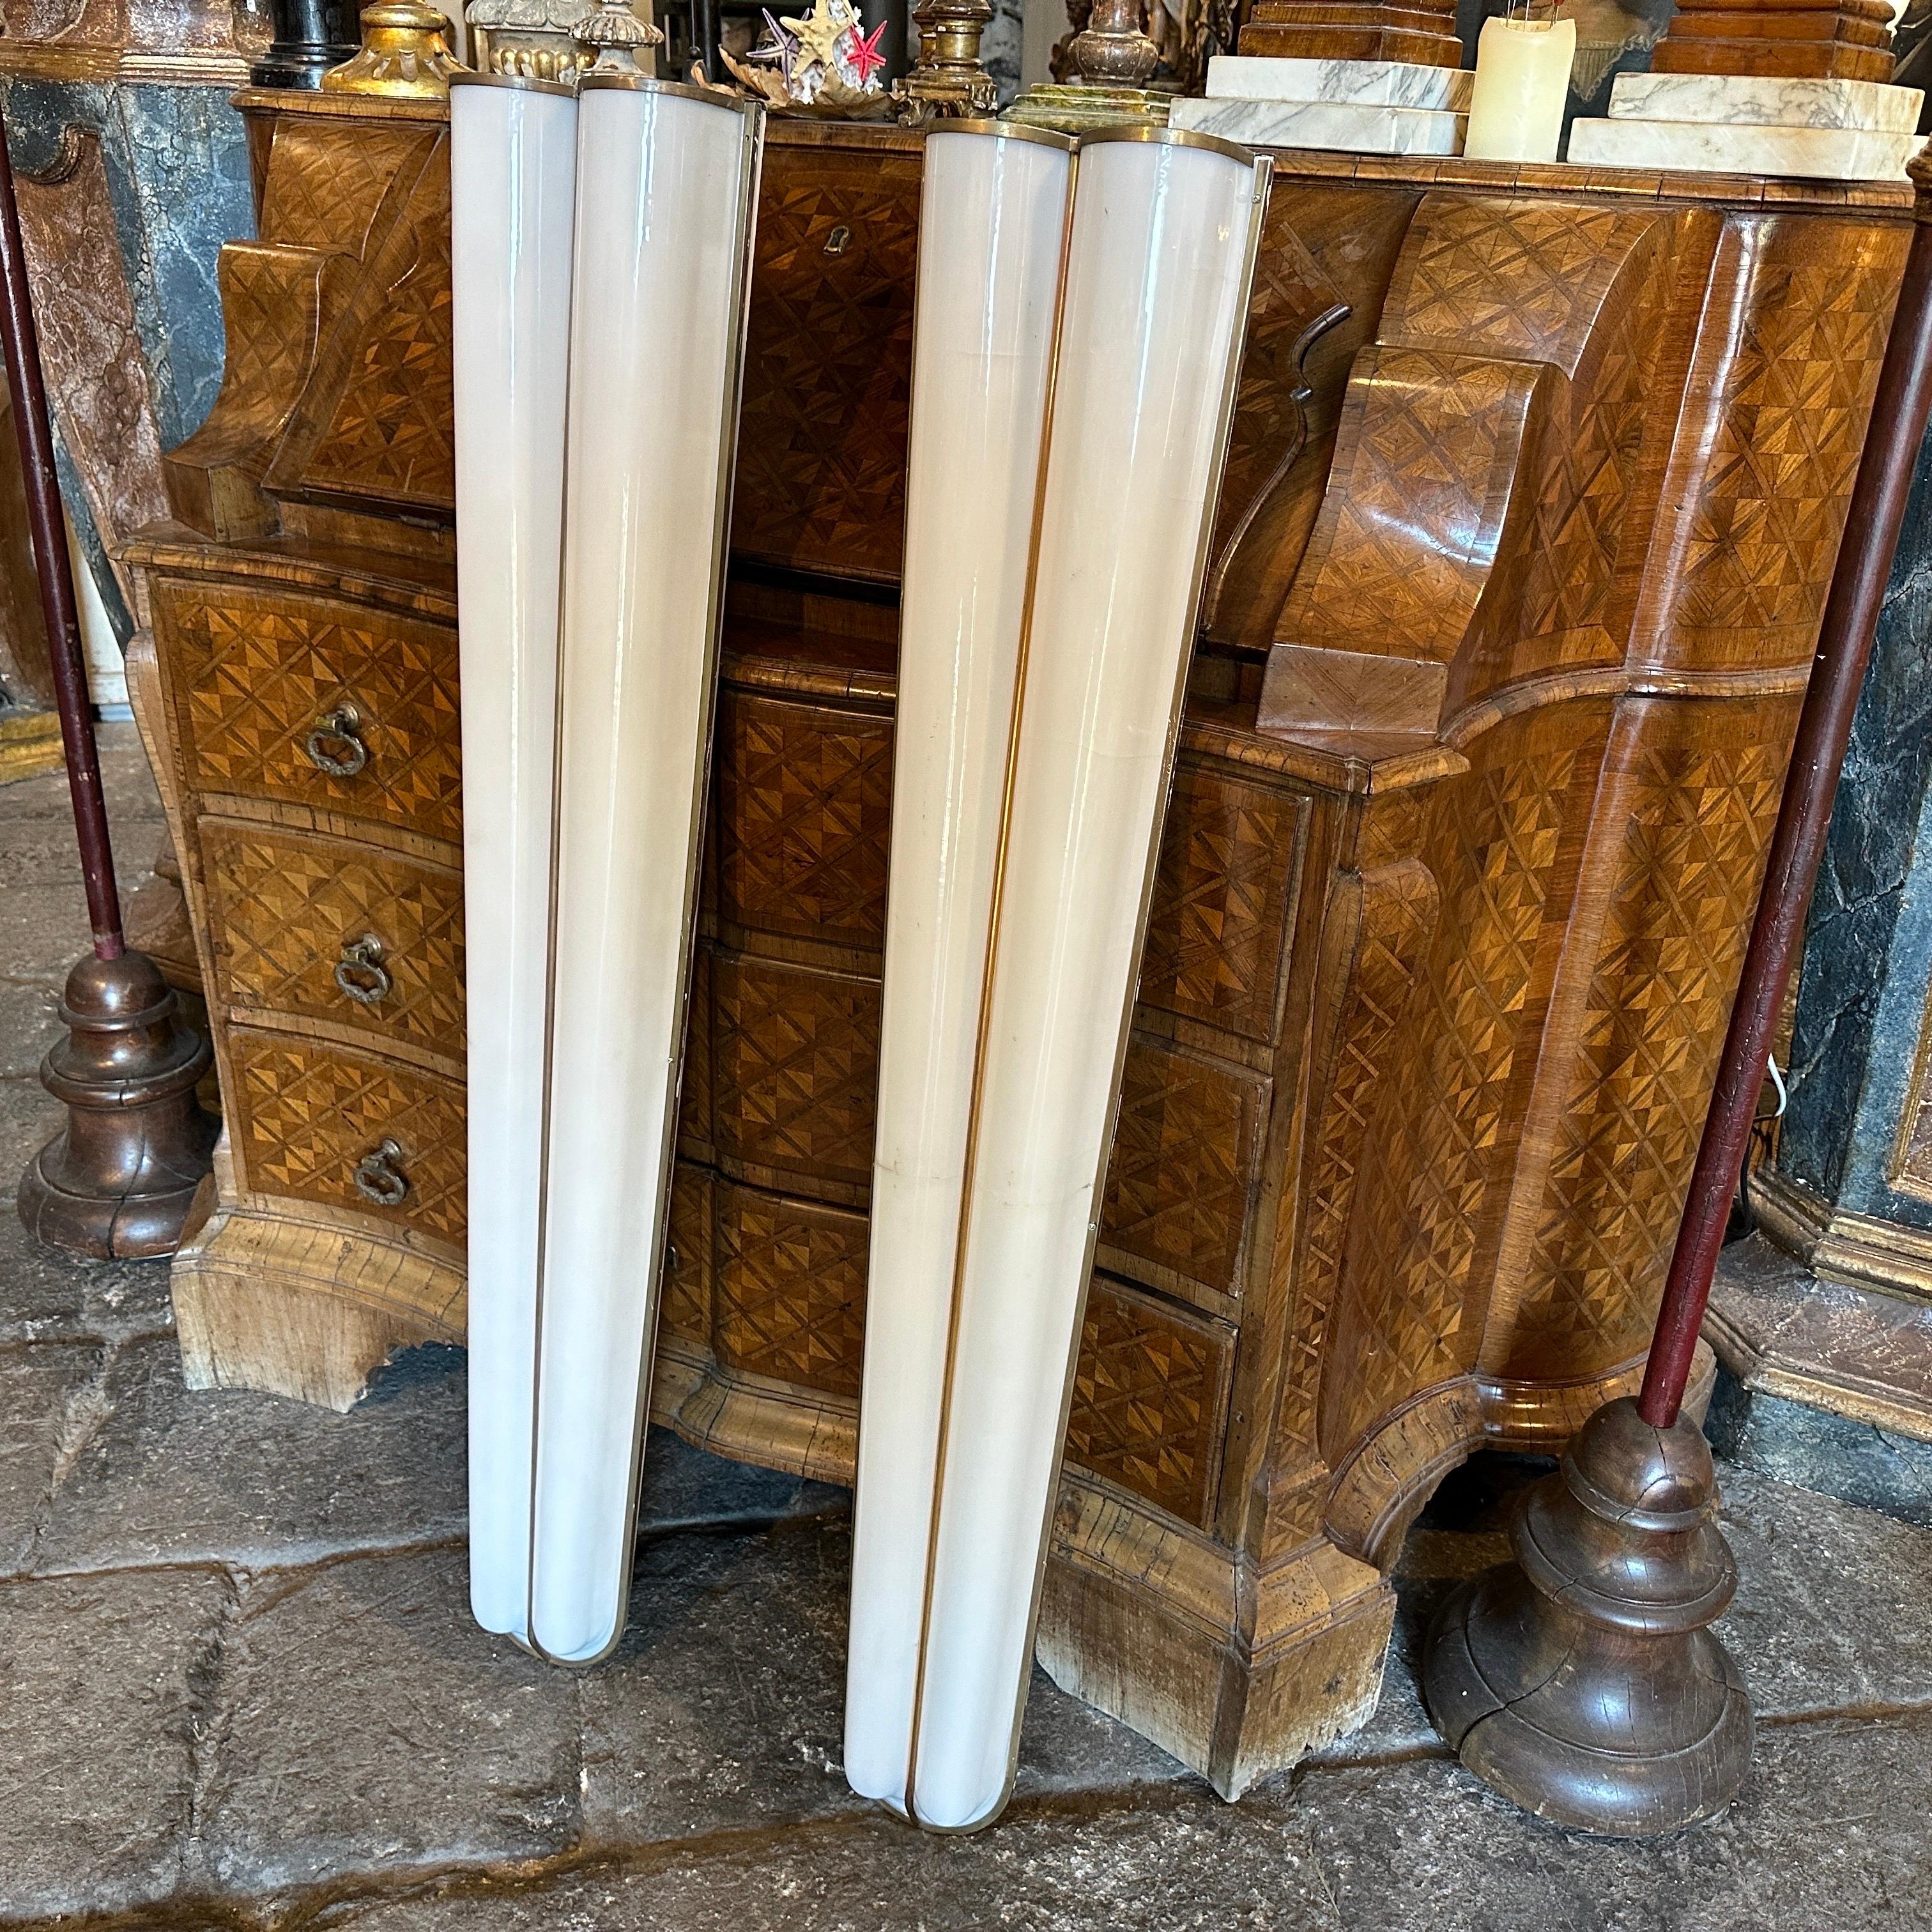 Two big theater wall sconces designed and manufactured in Italy in the Fifties, both wall lights have a line in the plexiglass visible on the photos. They are in working order. The sconces feature brass as the primary material for their frames.